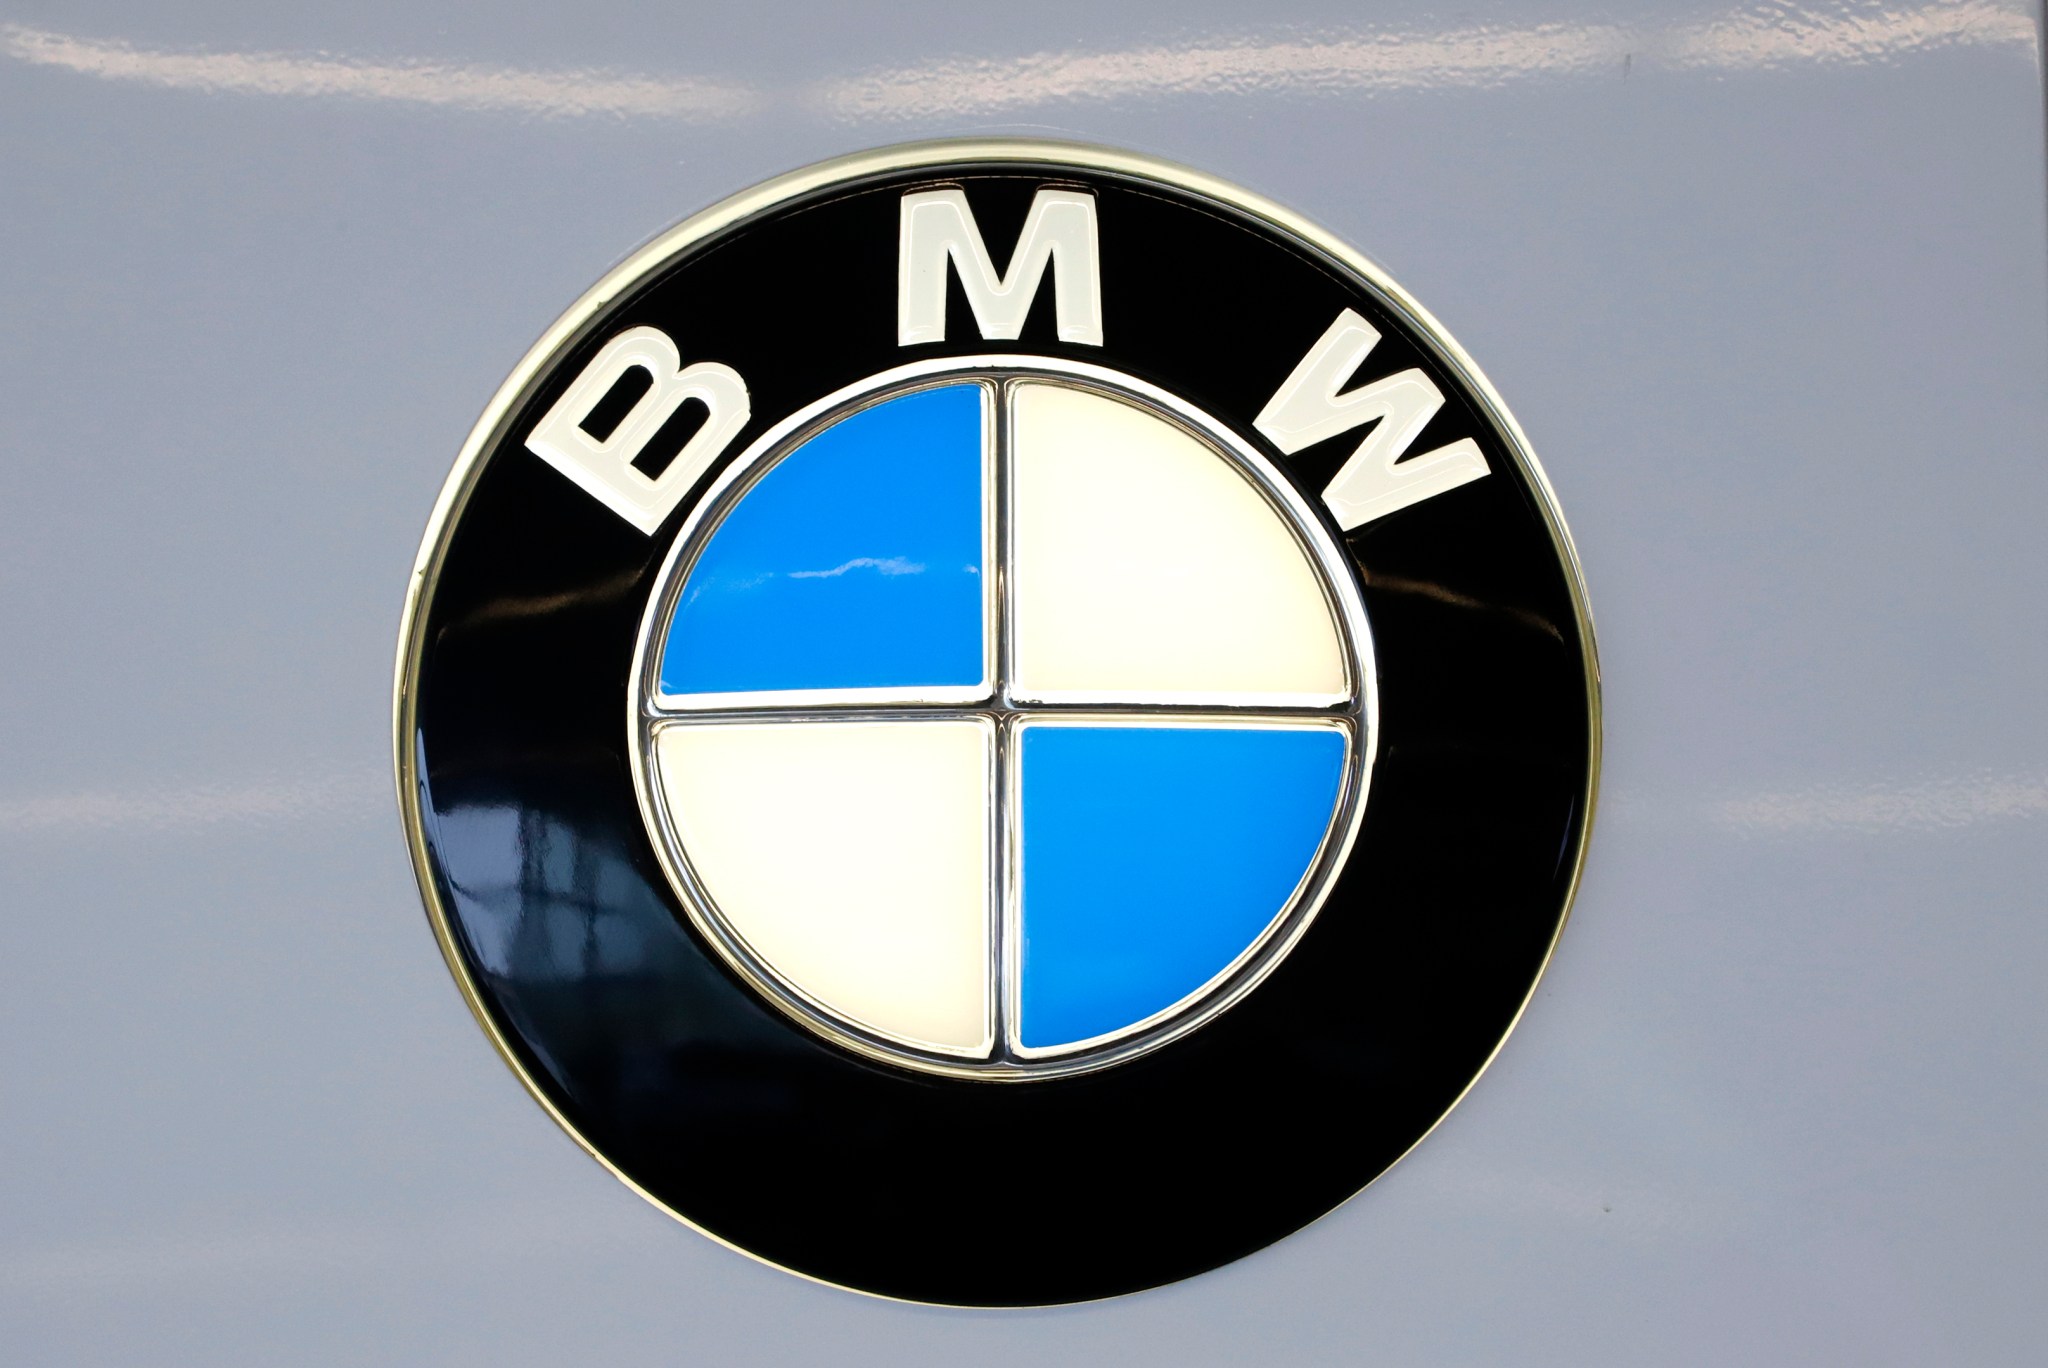 BMW is still recalling air bags with the defect that killed dozens and injured hundreds more